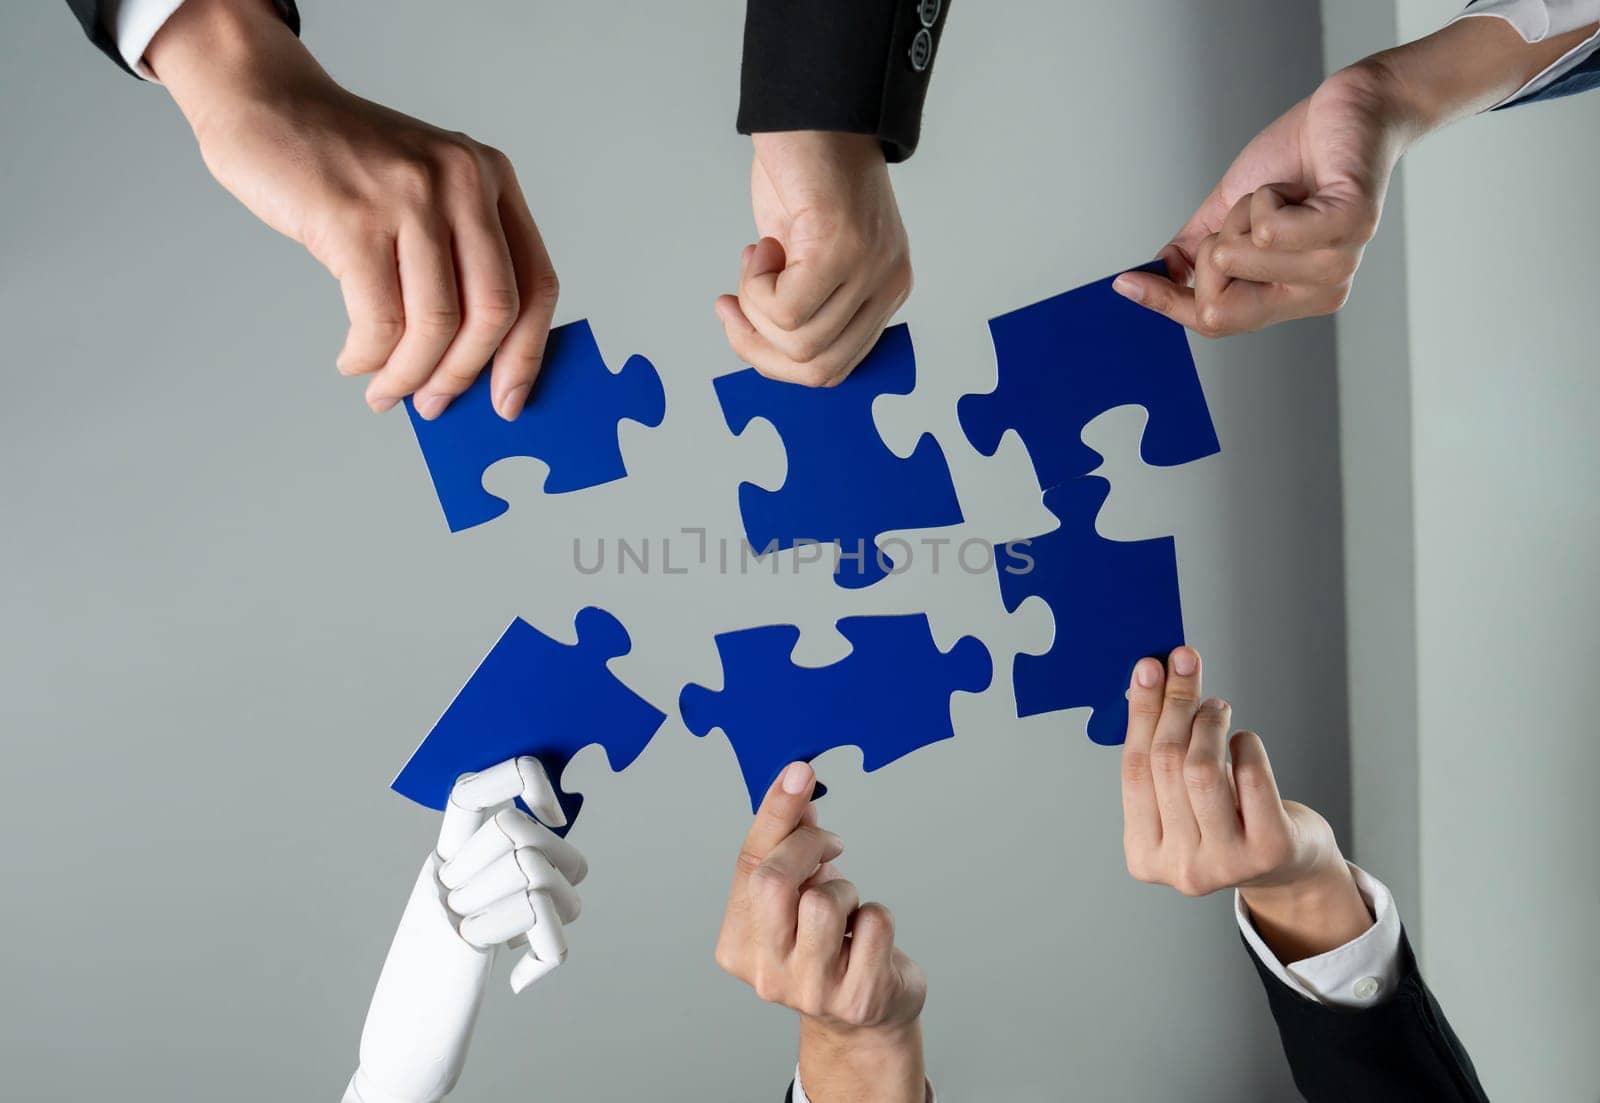 Futuristic HR recruitment with productive automation working in panoramic banner, as AI or artificial intelligence robotic workforce displace human. Robotic hand hold puzzle piece to fill gap. Shrewd